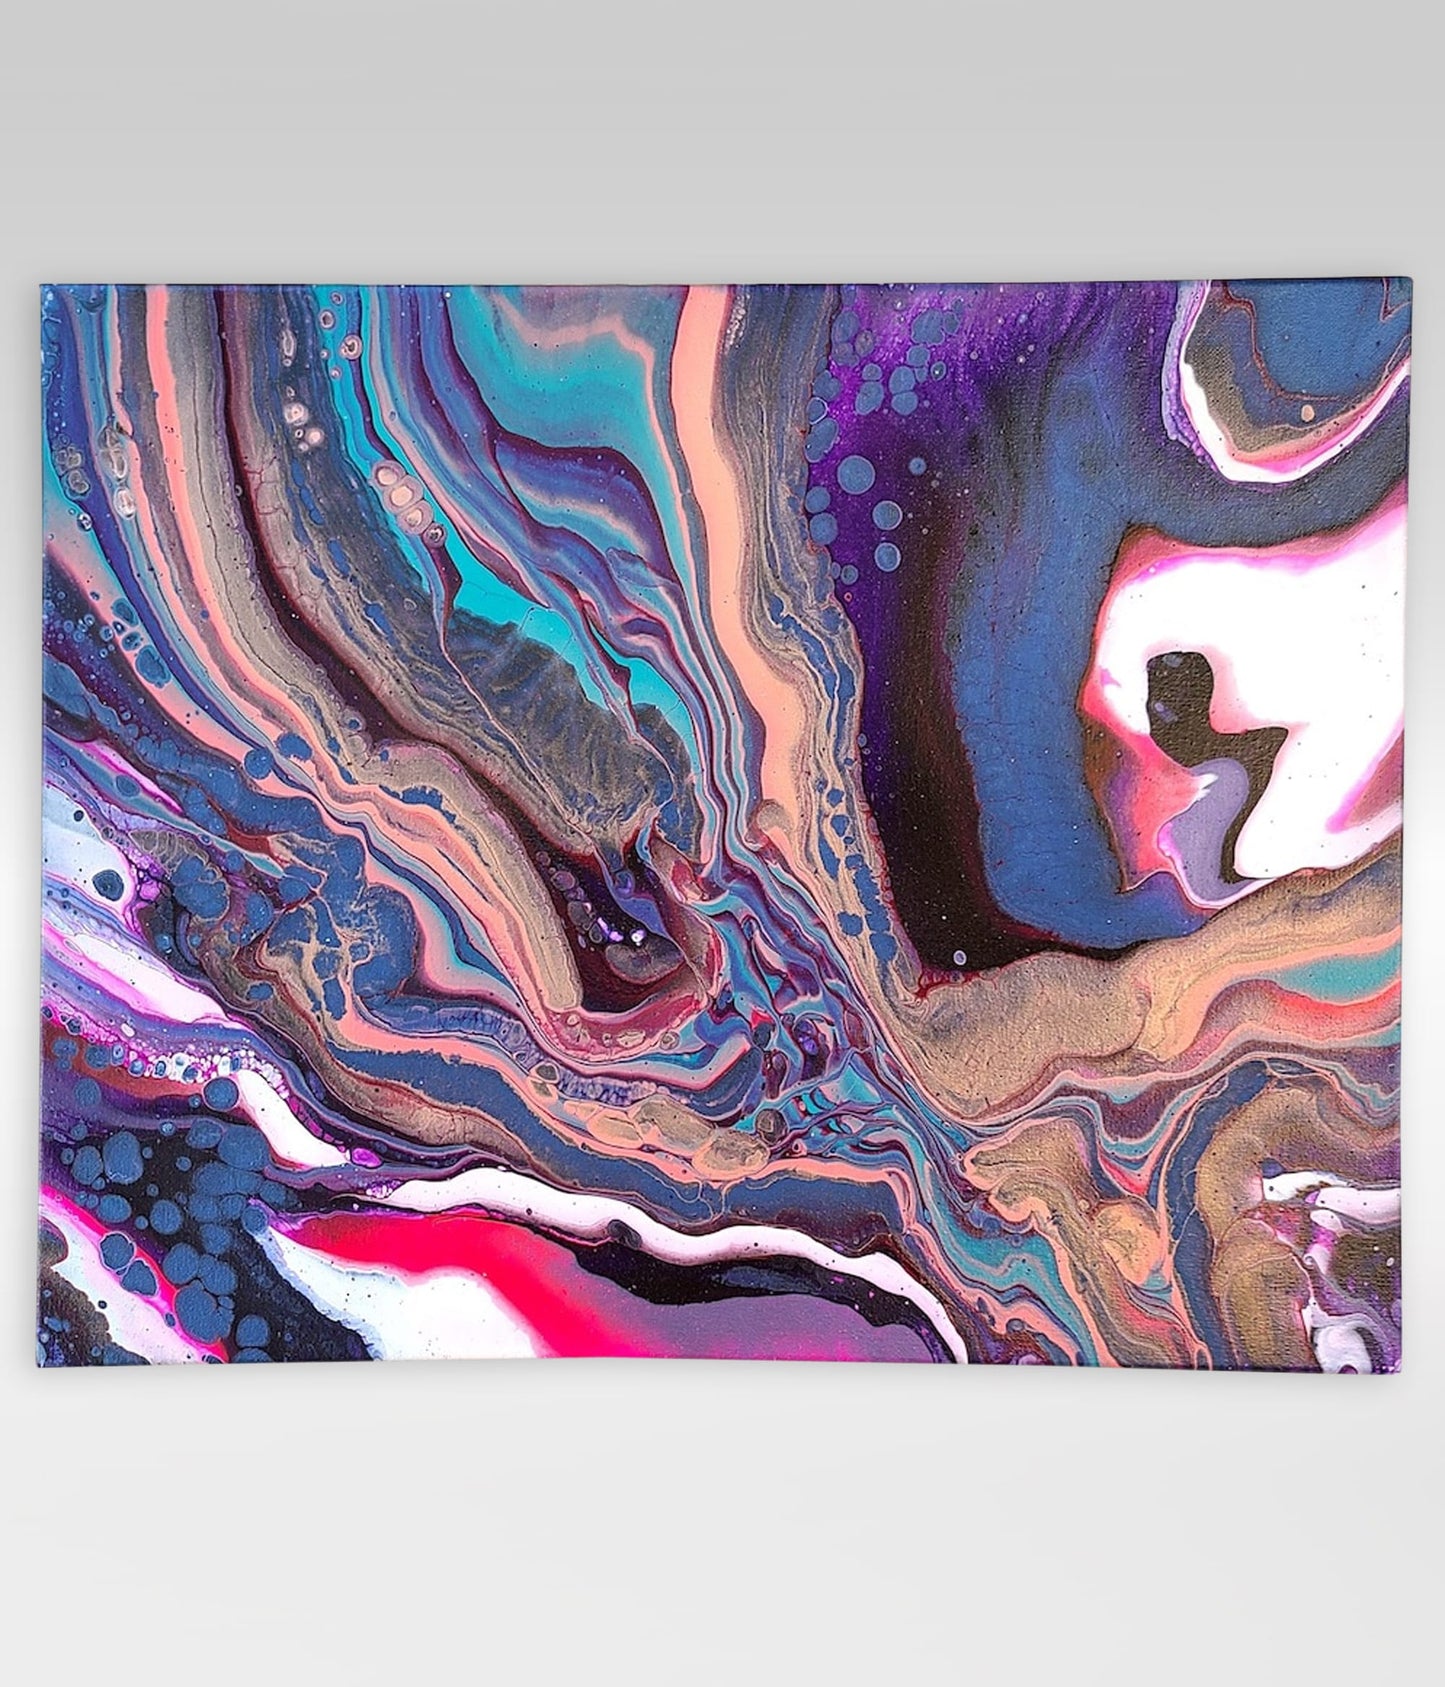 You See Nothing – 16 x 20 Acrylic Pour Painting On Canvas